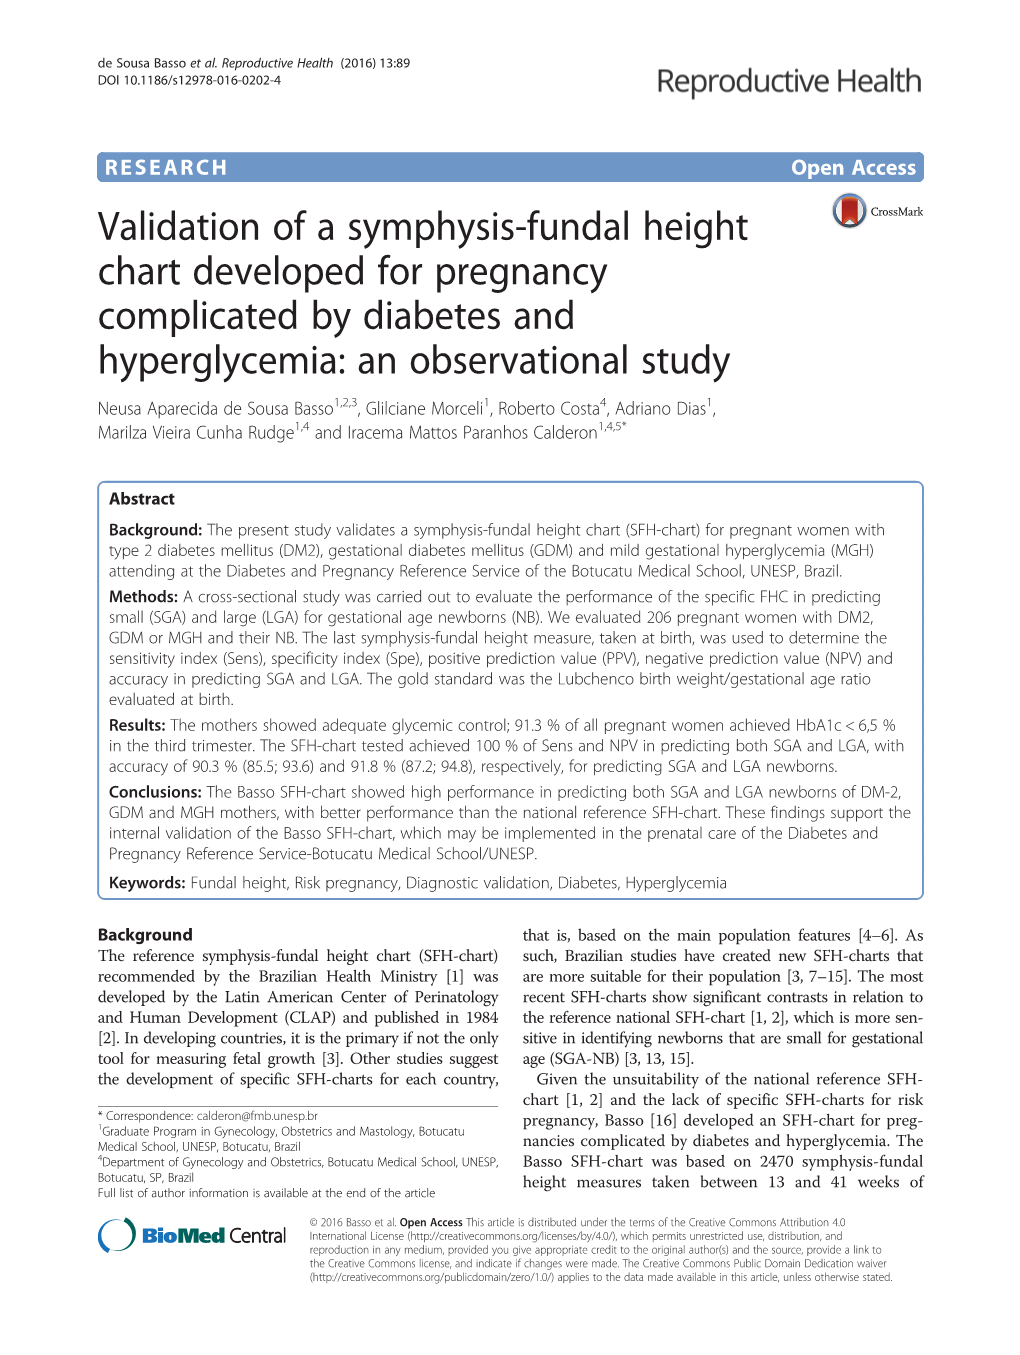 Validation of a Symphysis-Fundal Height Chart Developed For